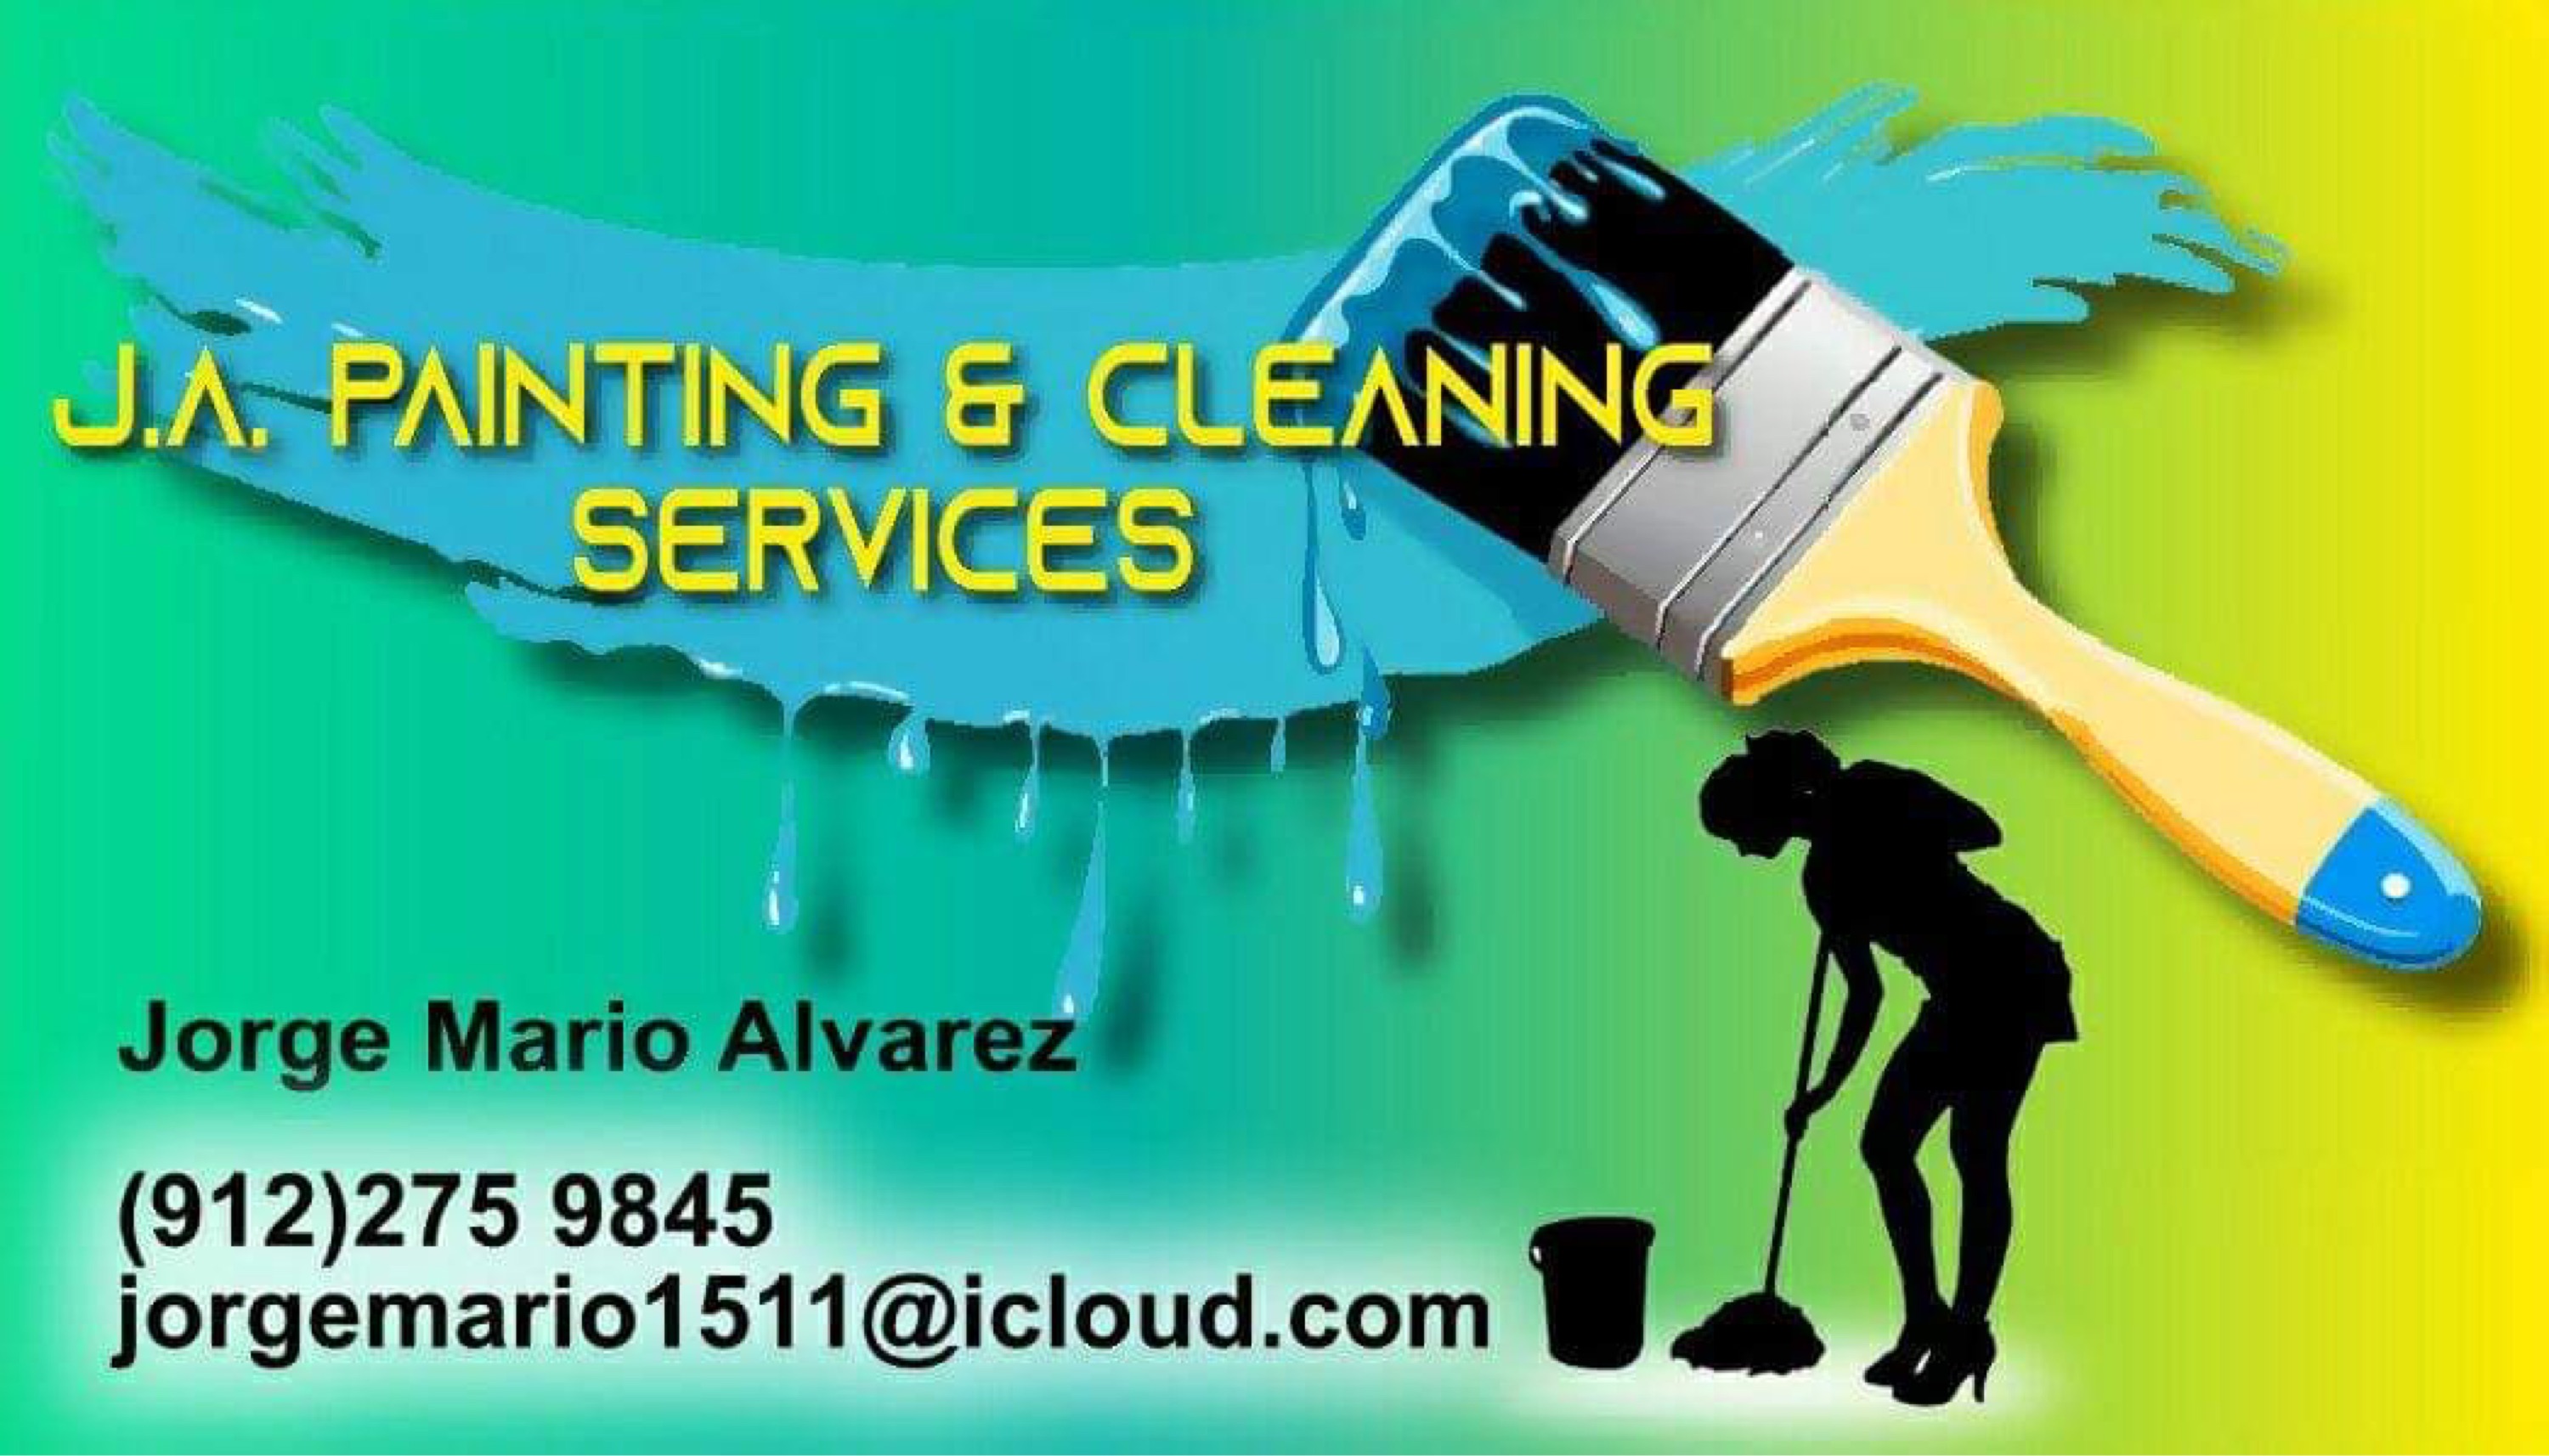 JA Painting and Cleaning Services Logo